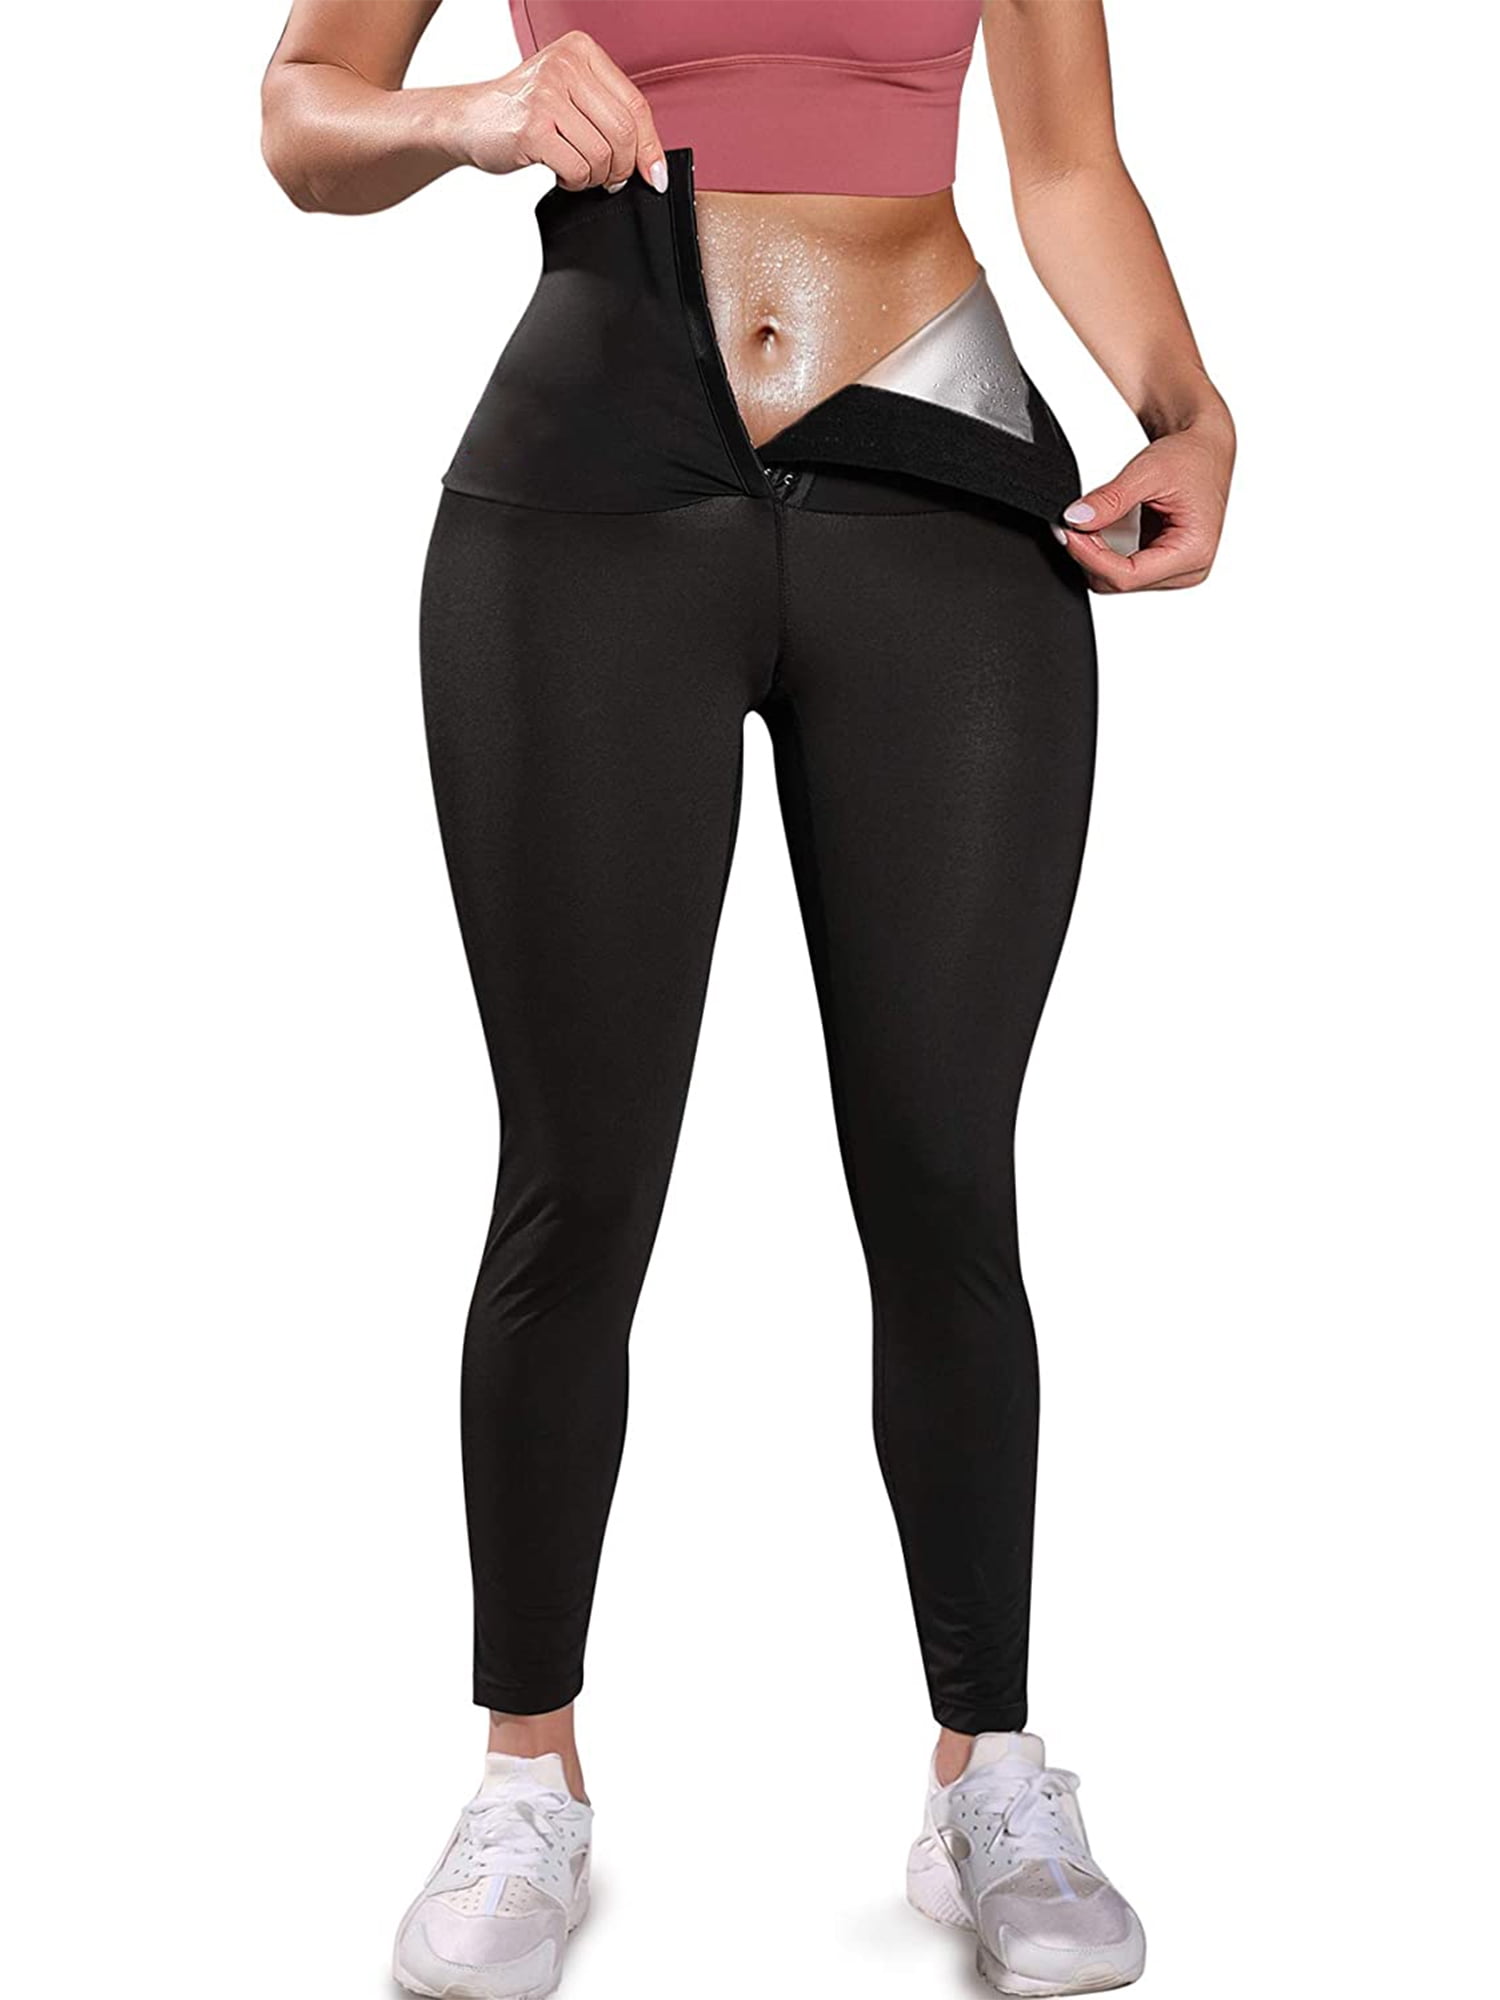 Caramet Thermal Leggings Compression Warmth Activewear Womens – Montissier